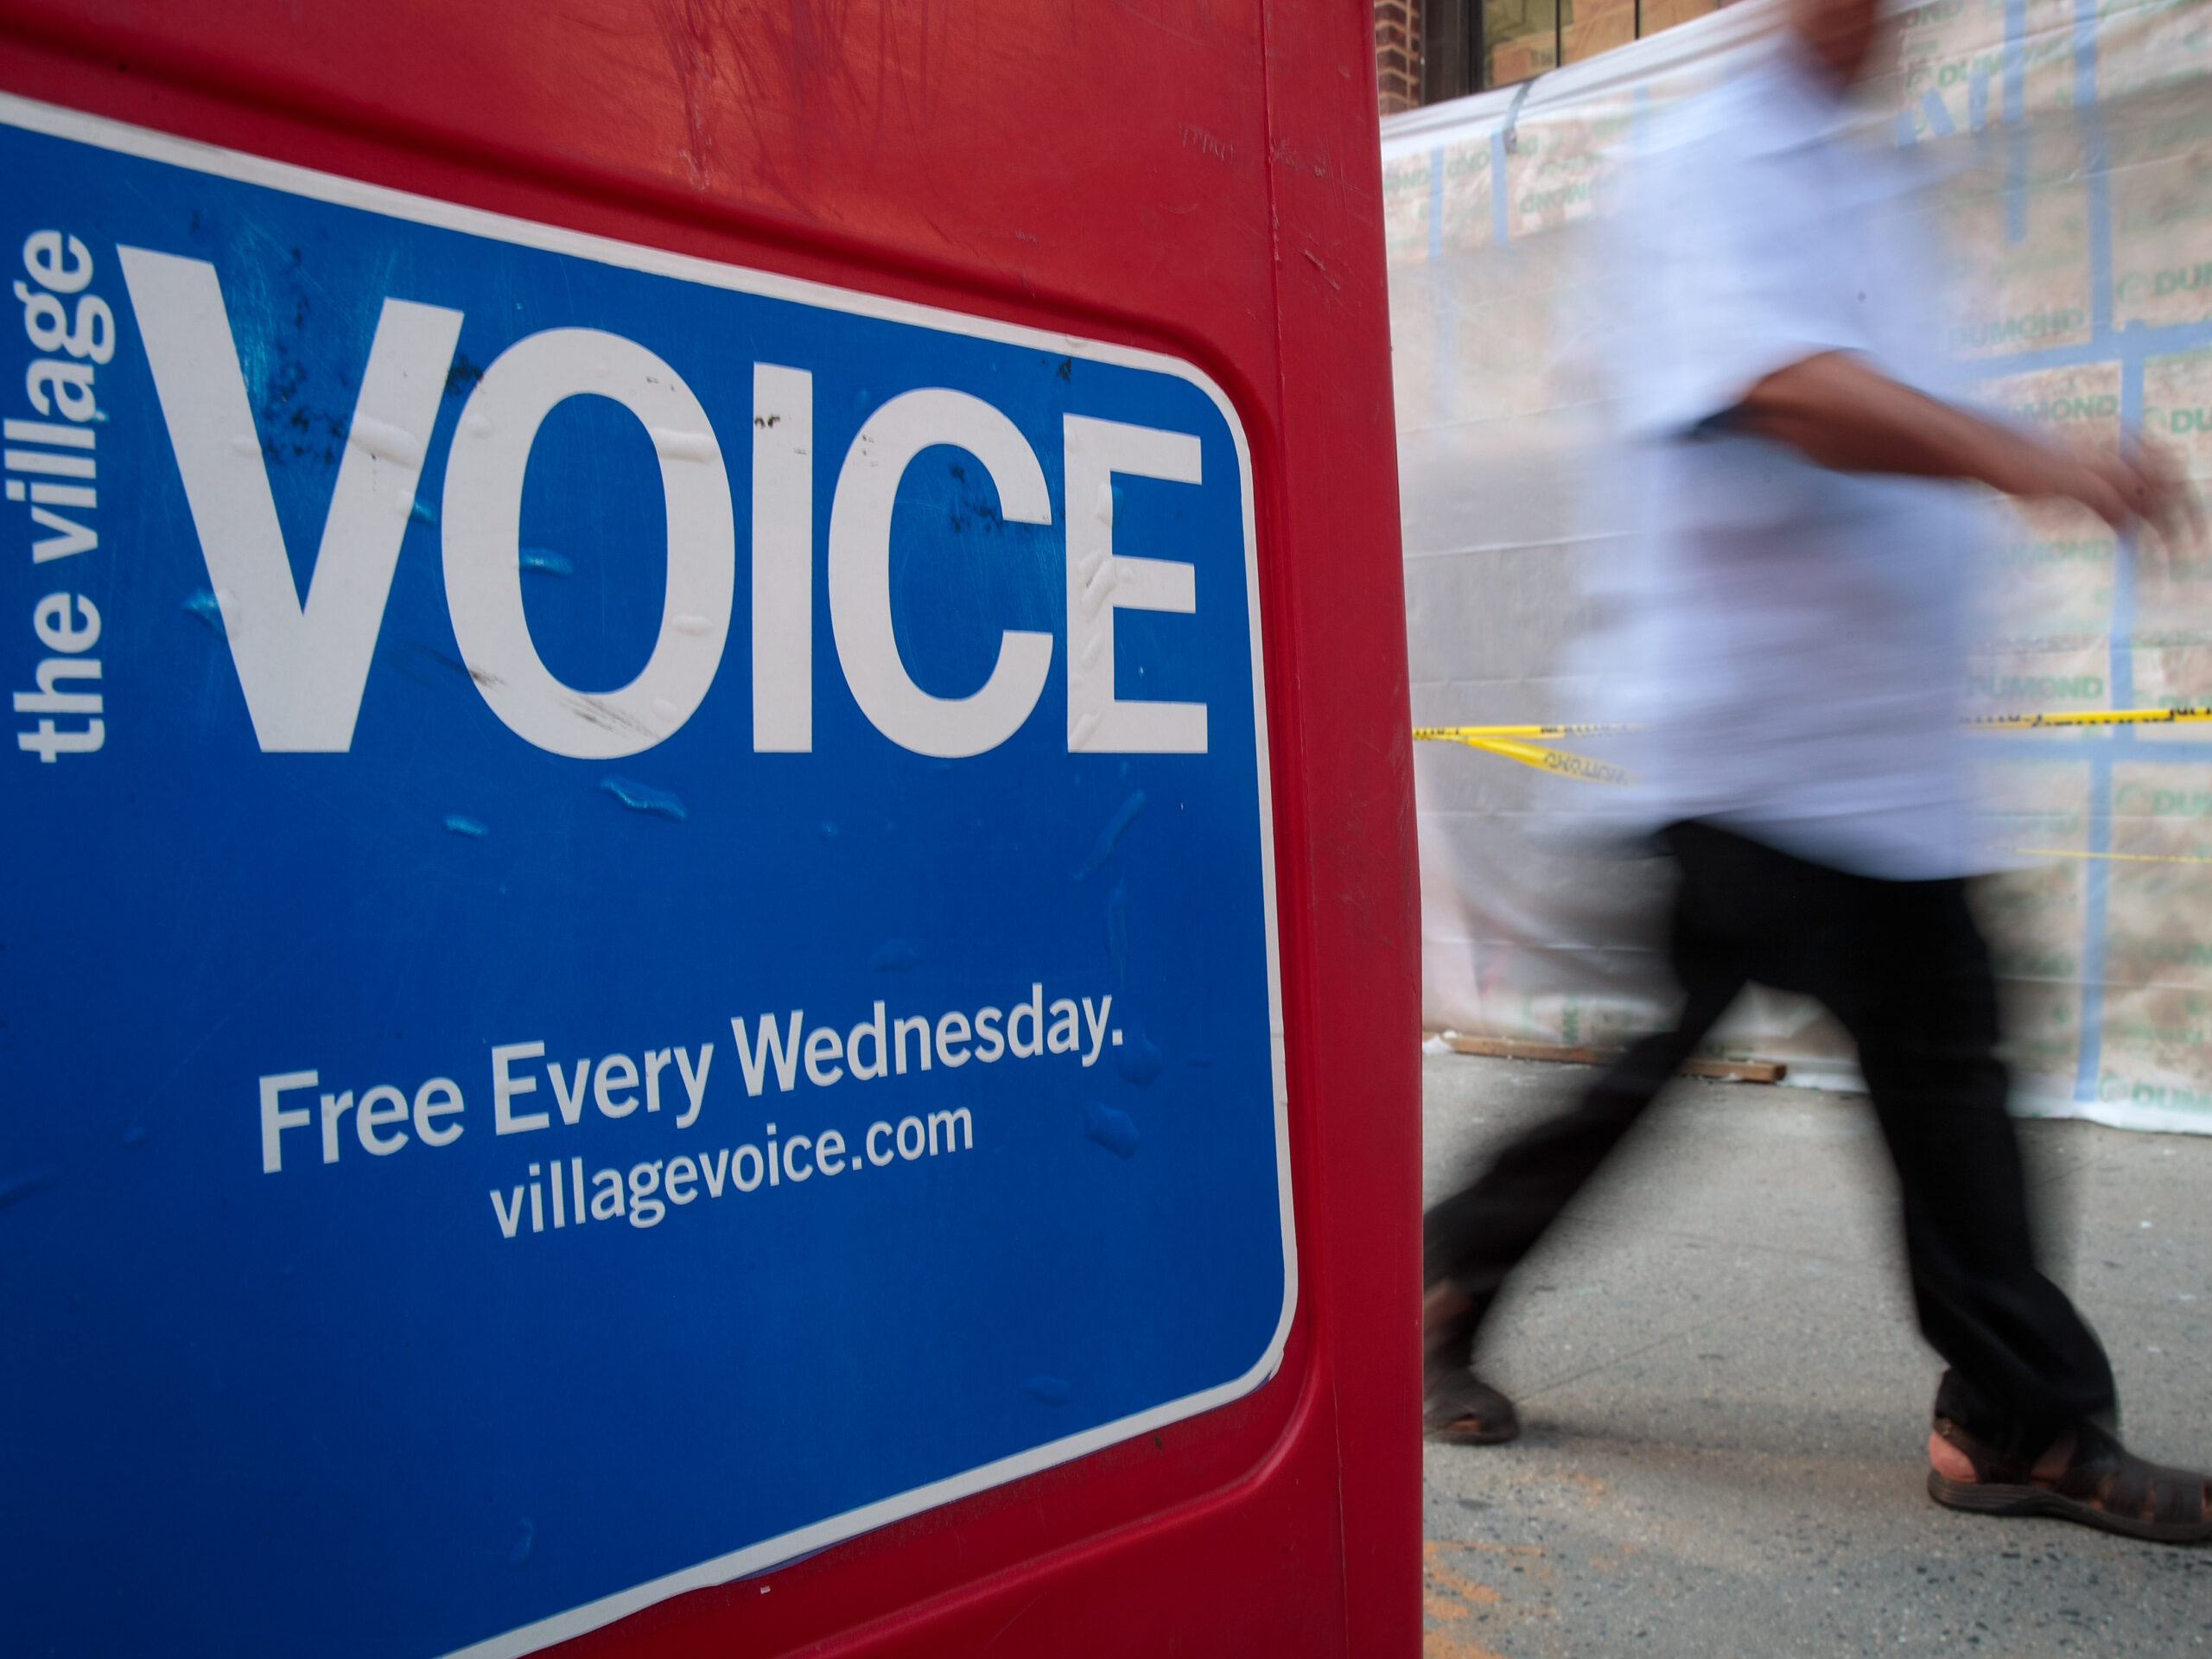 This oral history of the ‘Village Voice’ captures its creativity and rebelliousness